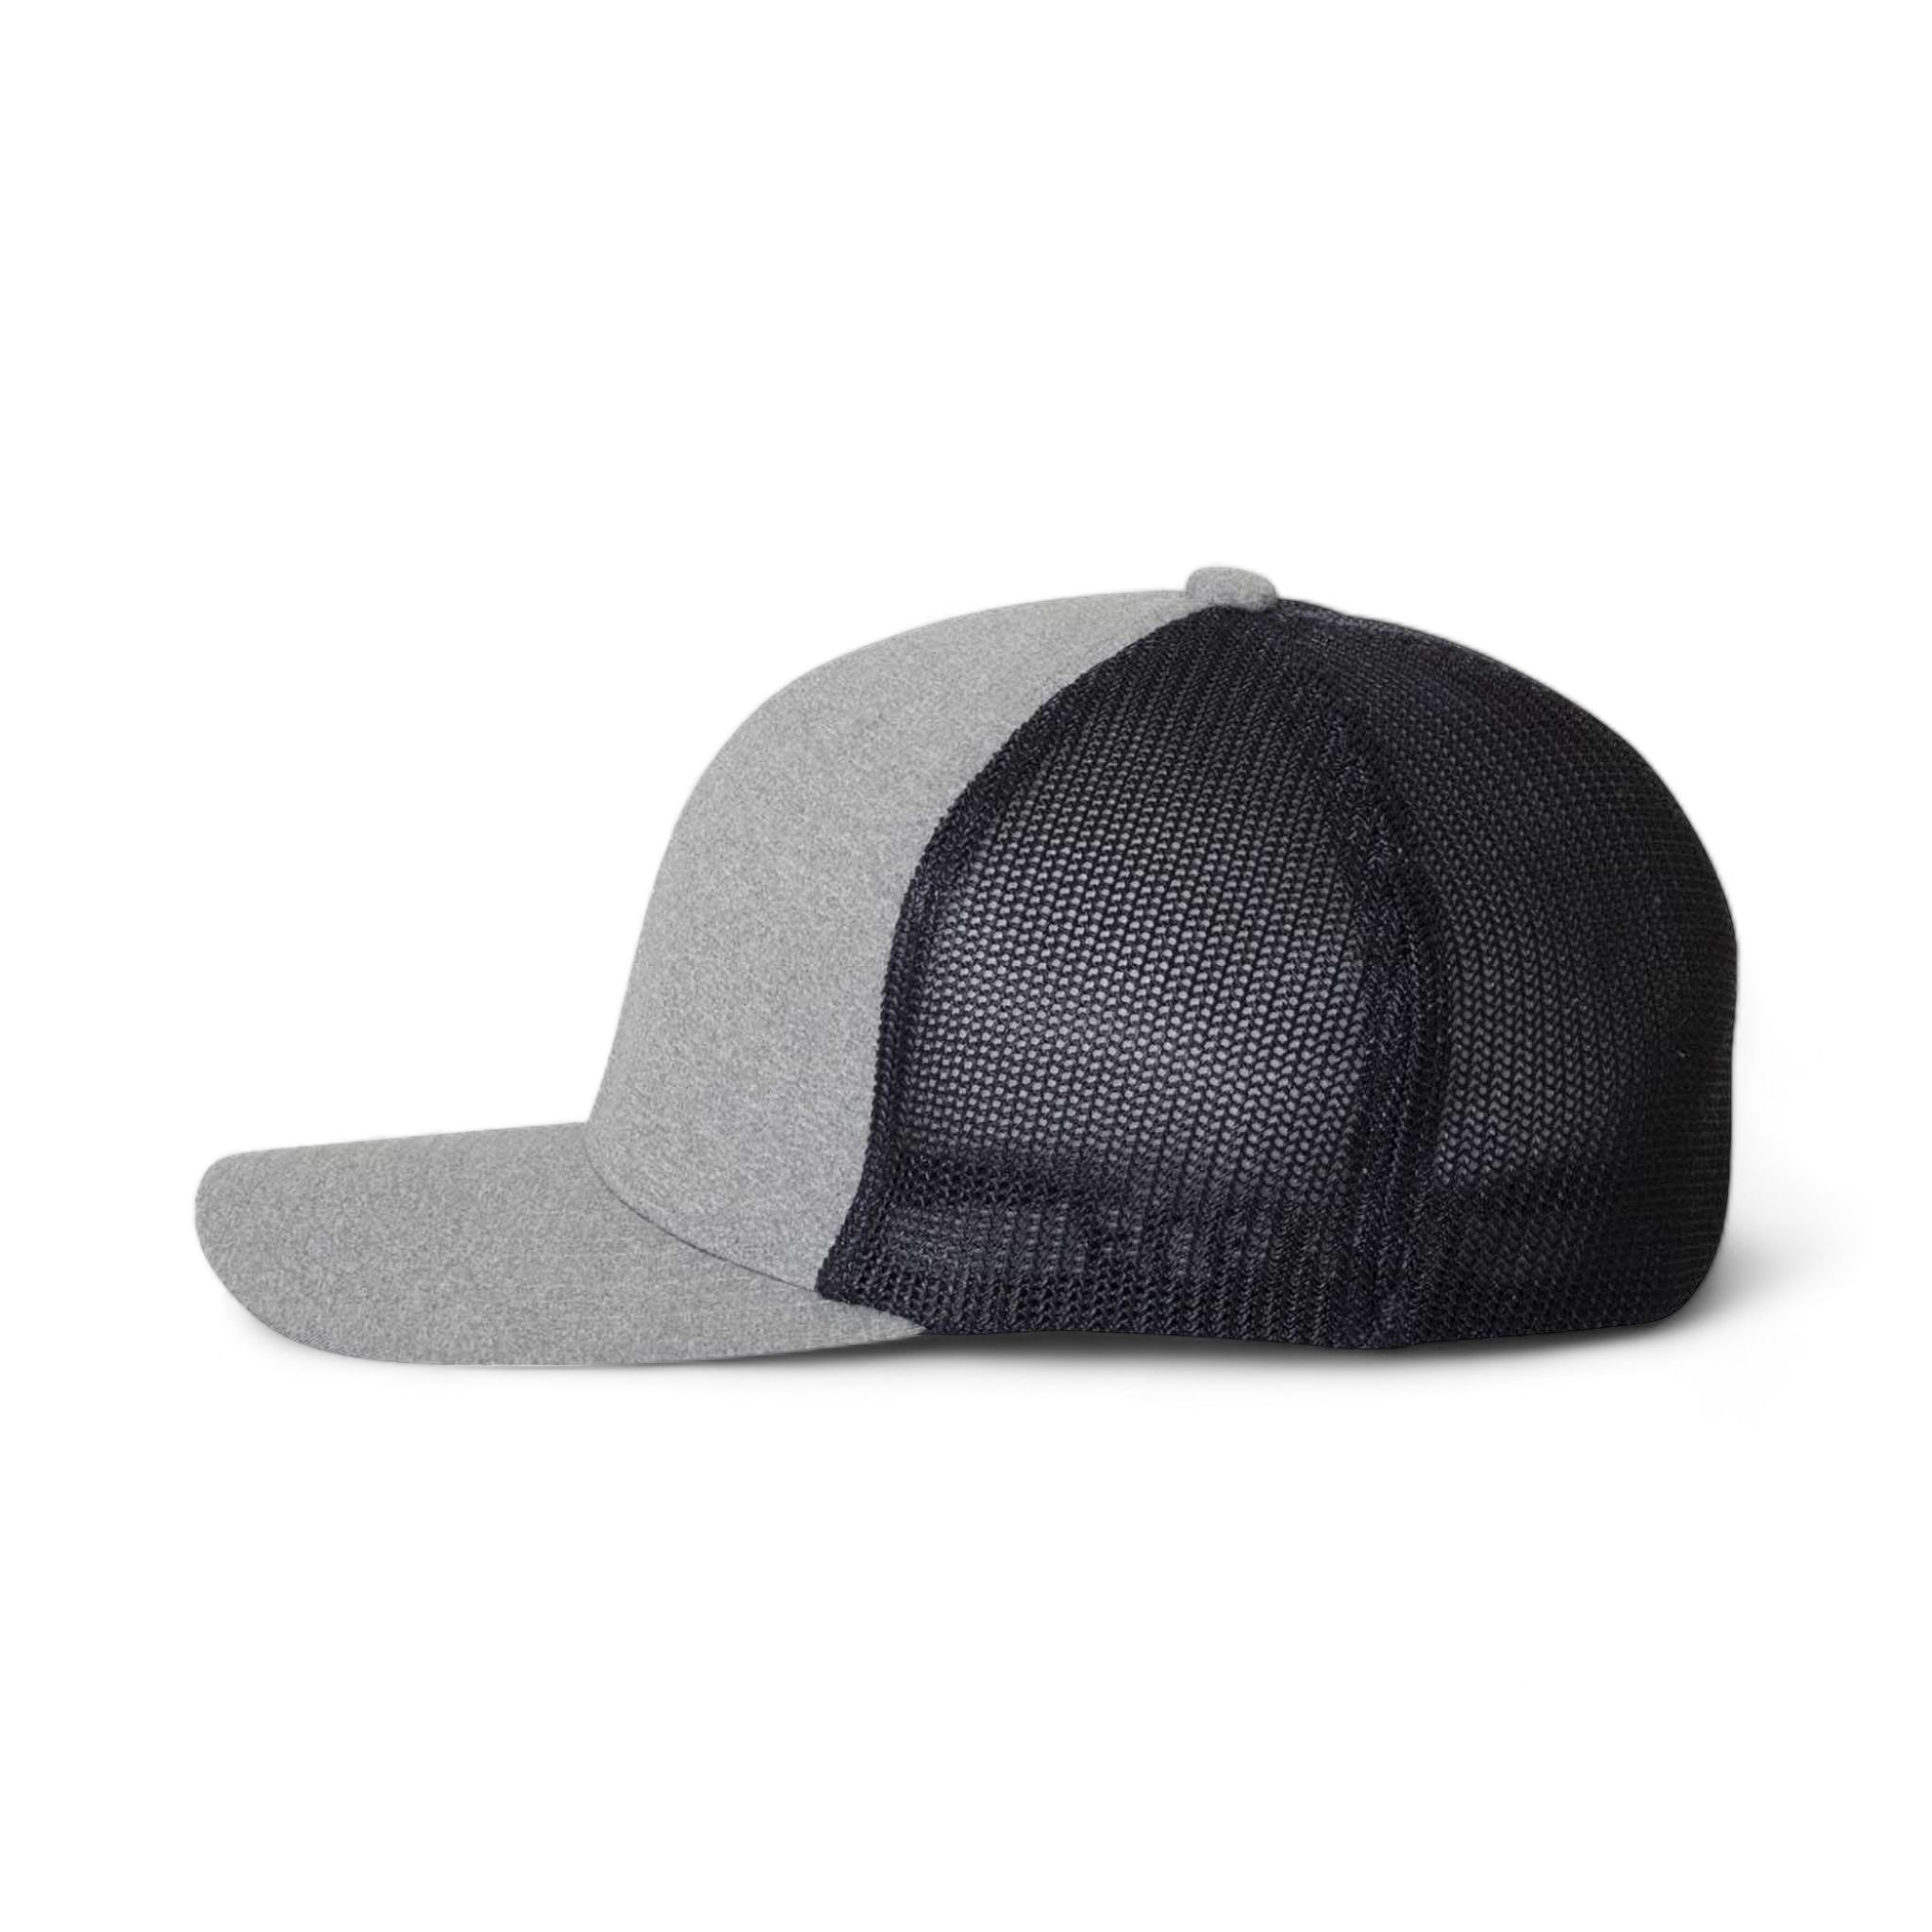 Side view of Flexfit 6311 custom hat in heather grey and navy